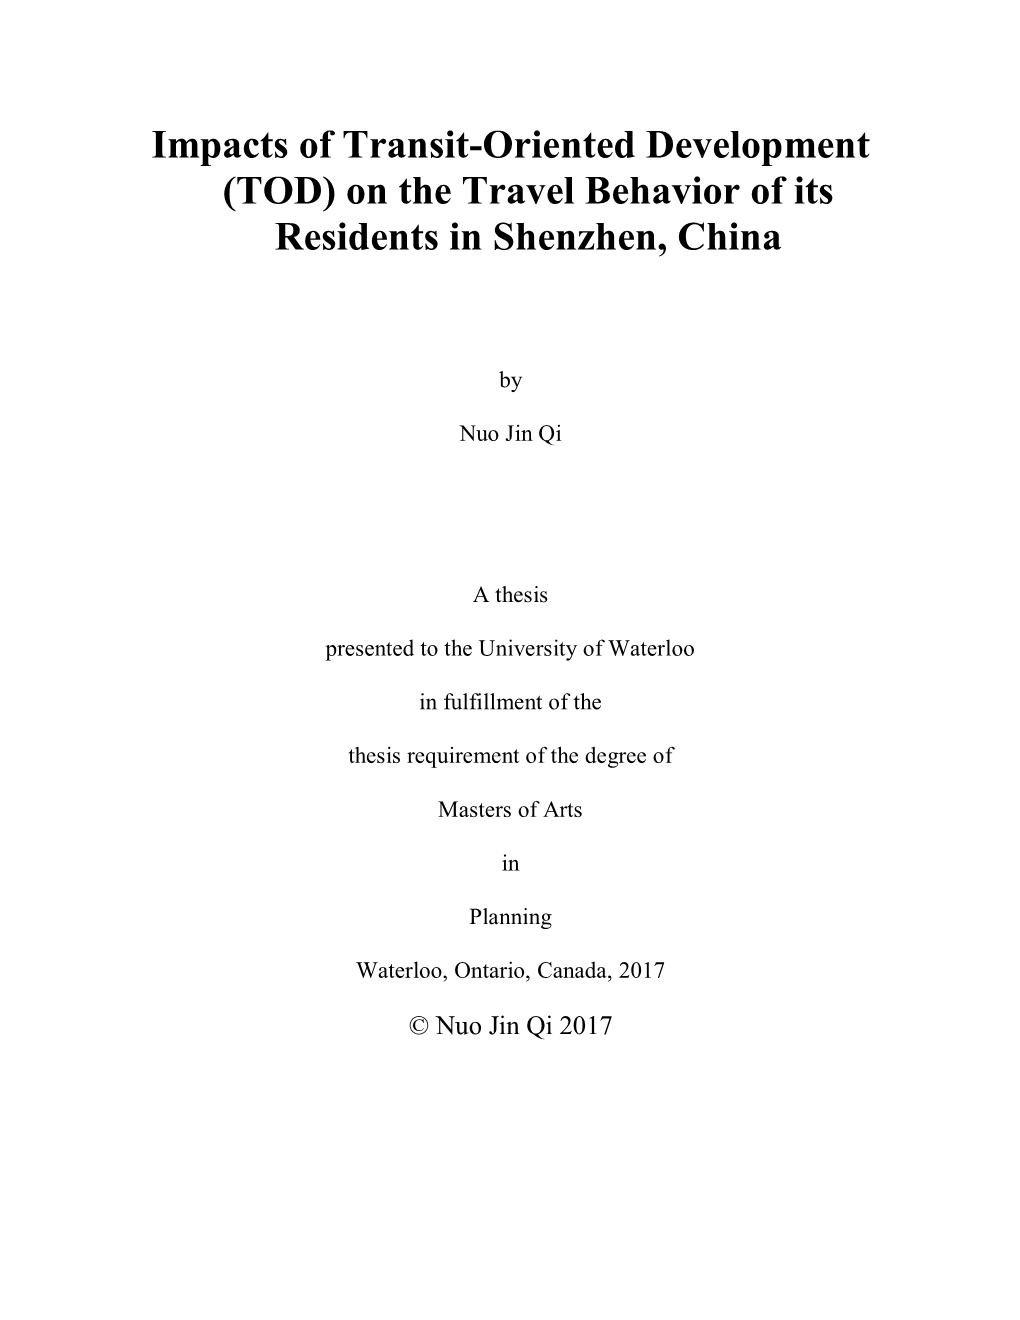 Impacts of Transit-Oriented Development (TOD) on the Travel Behavior of Its Residents in Shenzhen, China